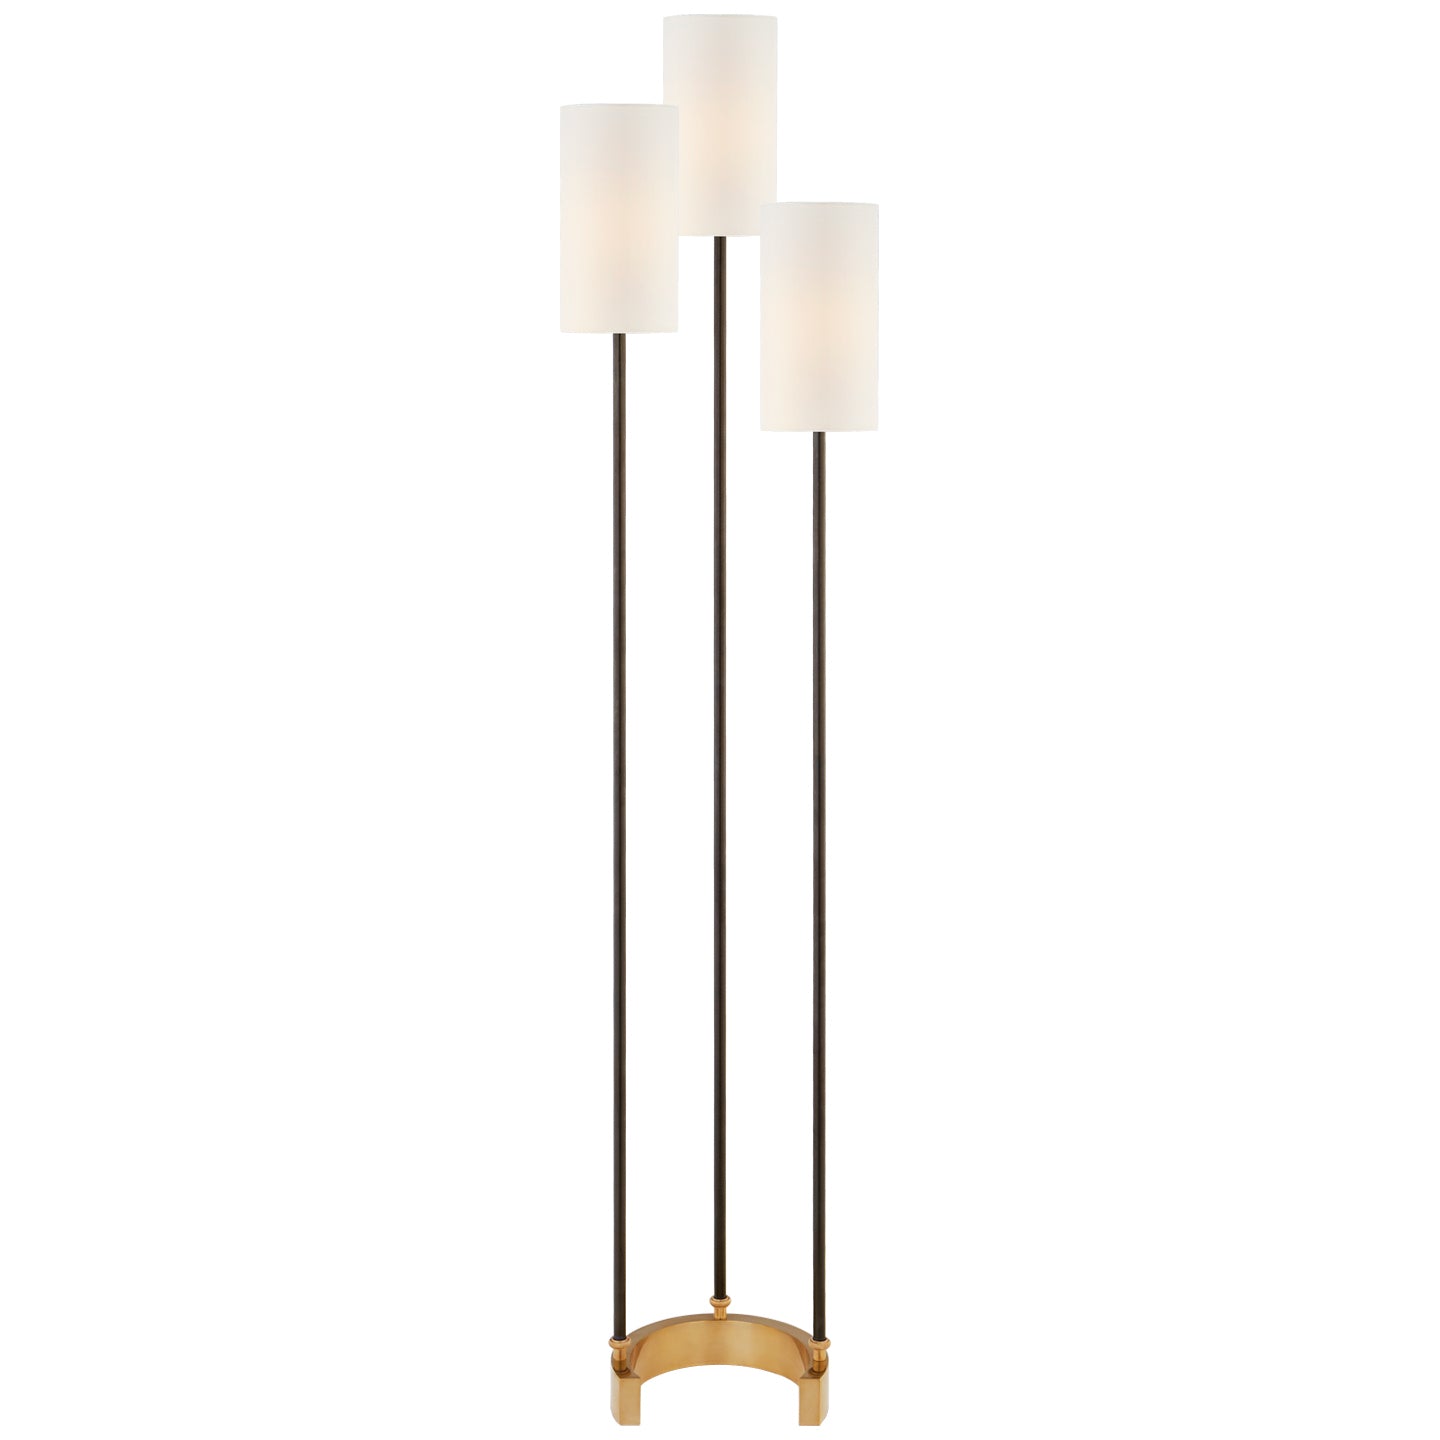 Load image into Gallery viewer, Visual Comfort Signature - SK 1550BZ/HAB-L - Three Light Floor Lamp - Aimee - Bronze and Hand-Rubbed Antique Brass
